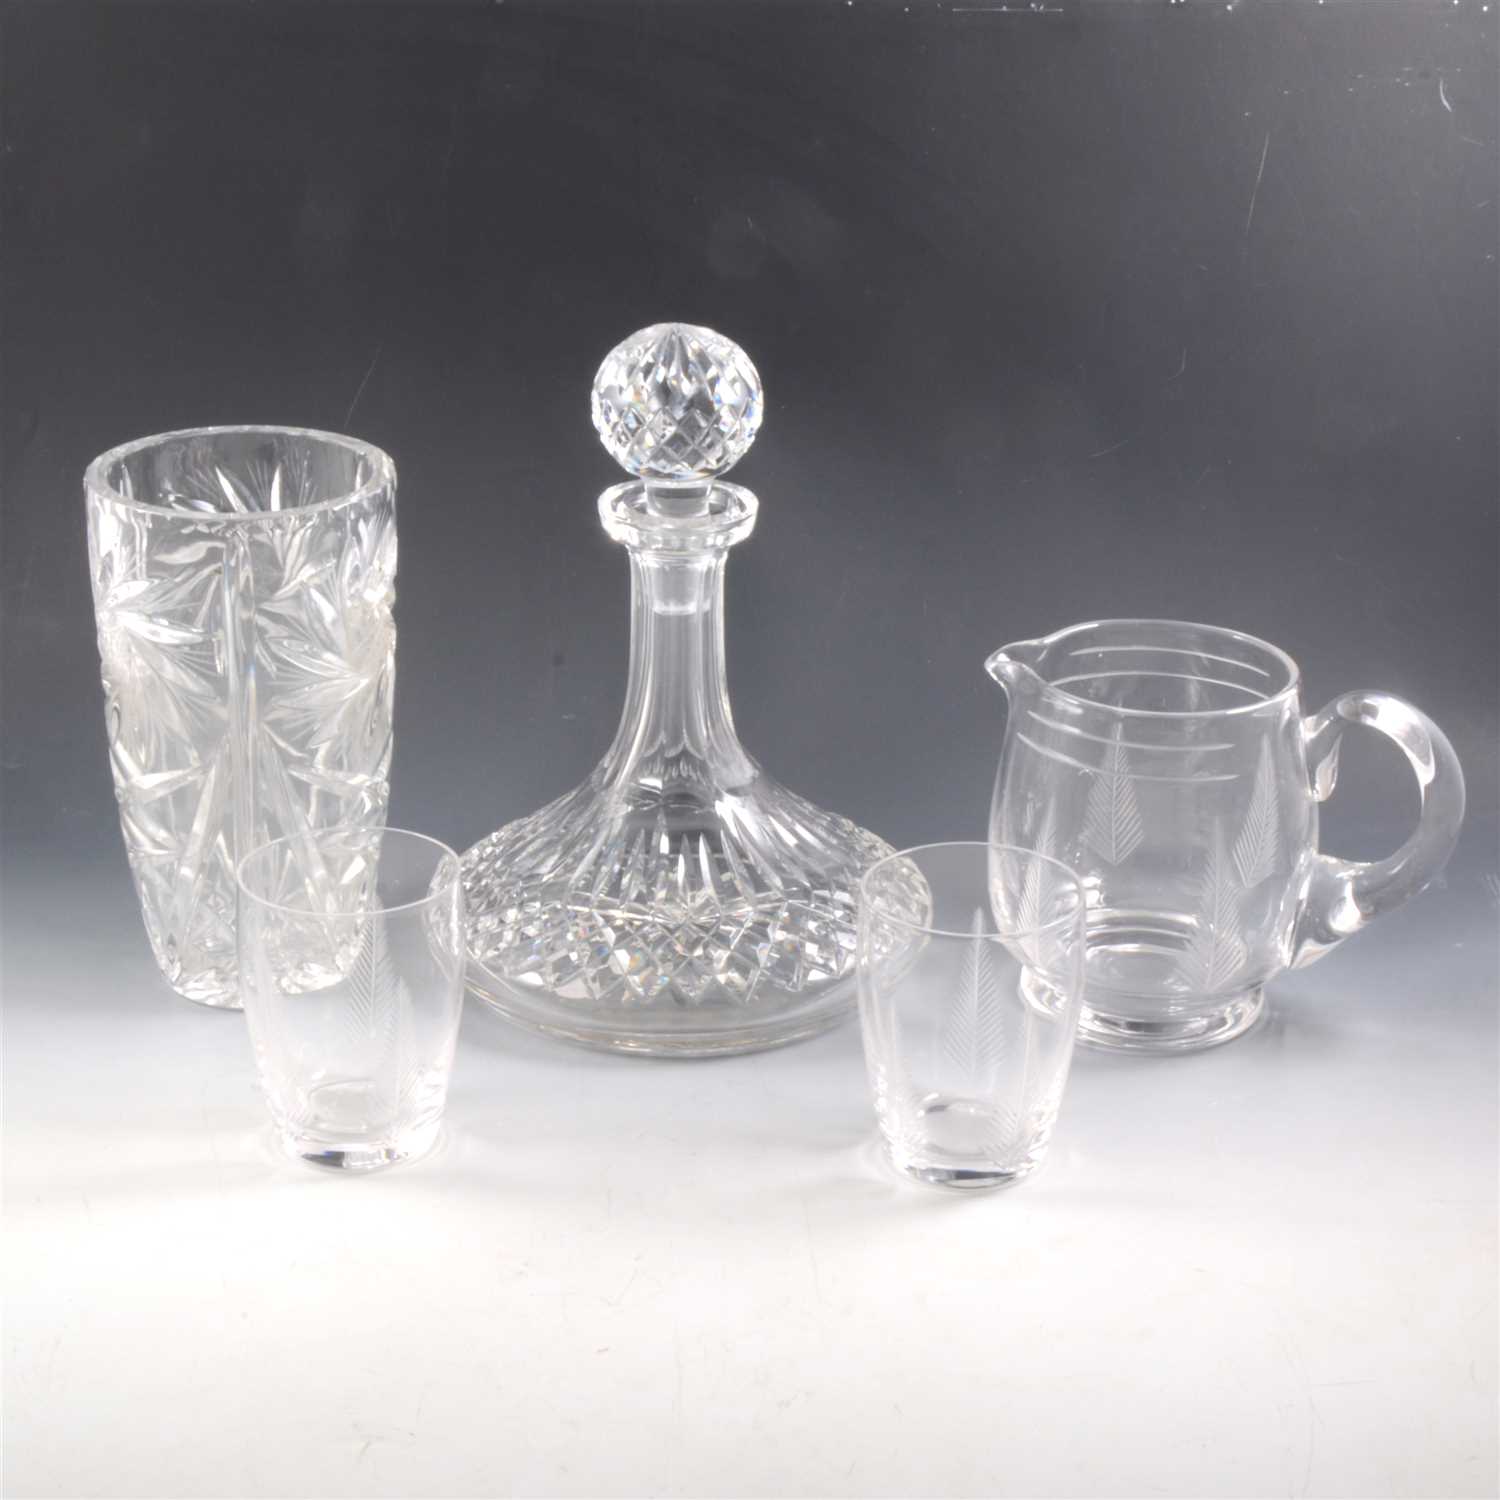 Lot 71 - A collection of glassware, including a jug and tumbler set, six matching "port" glasses, etc